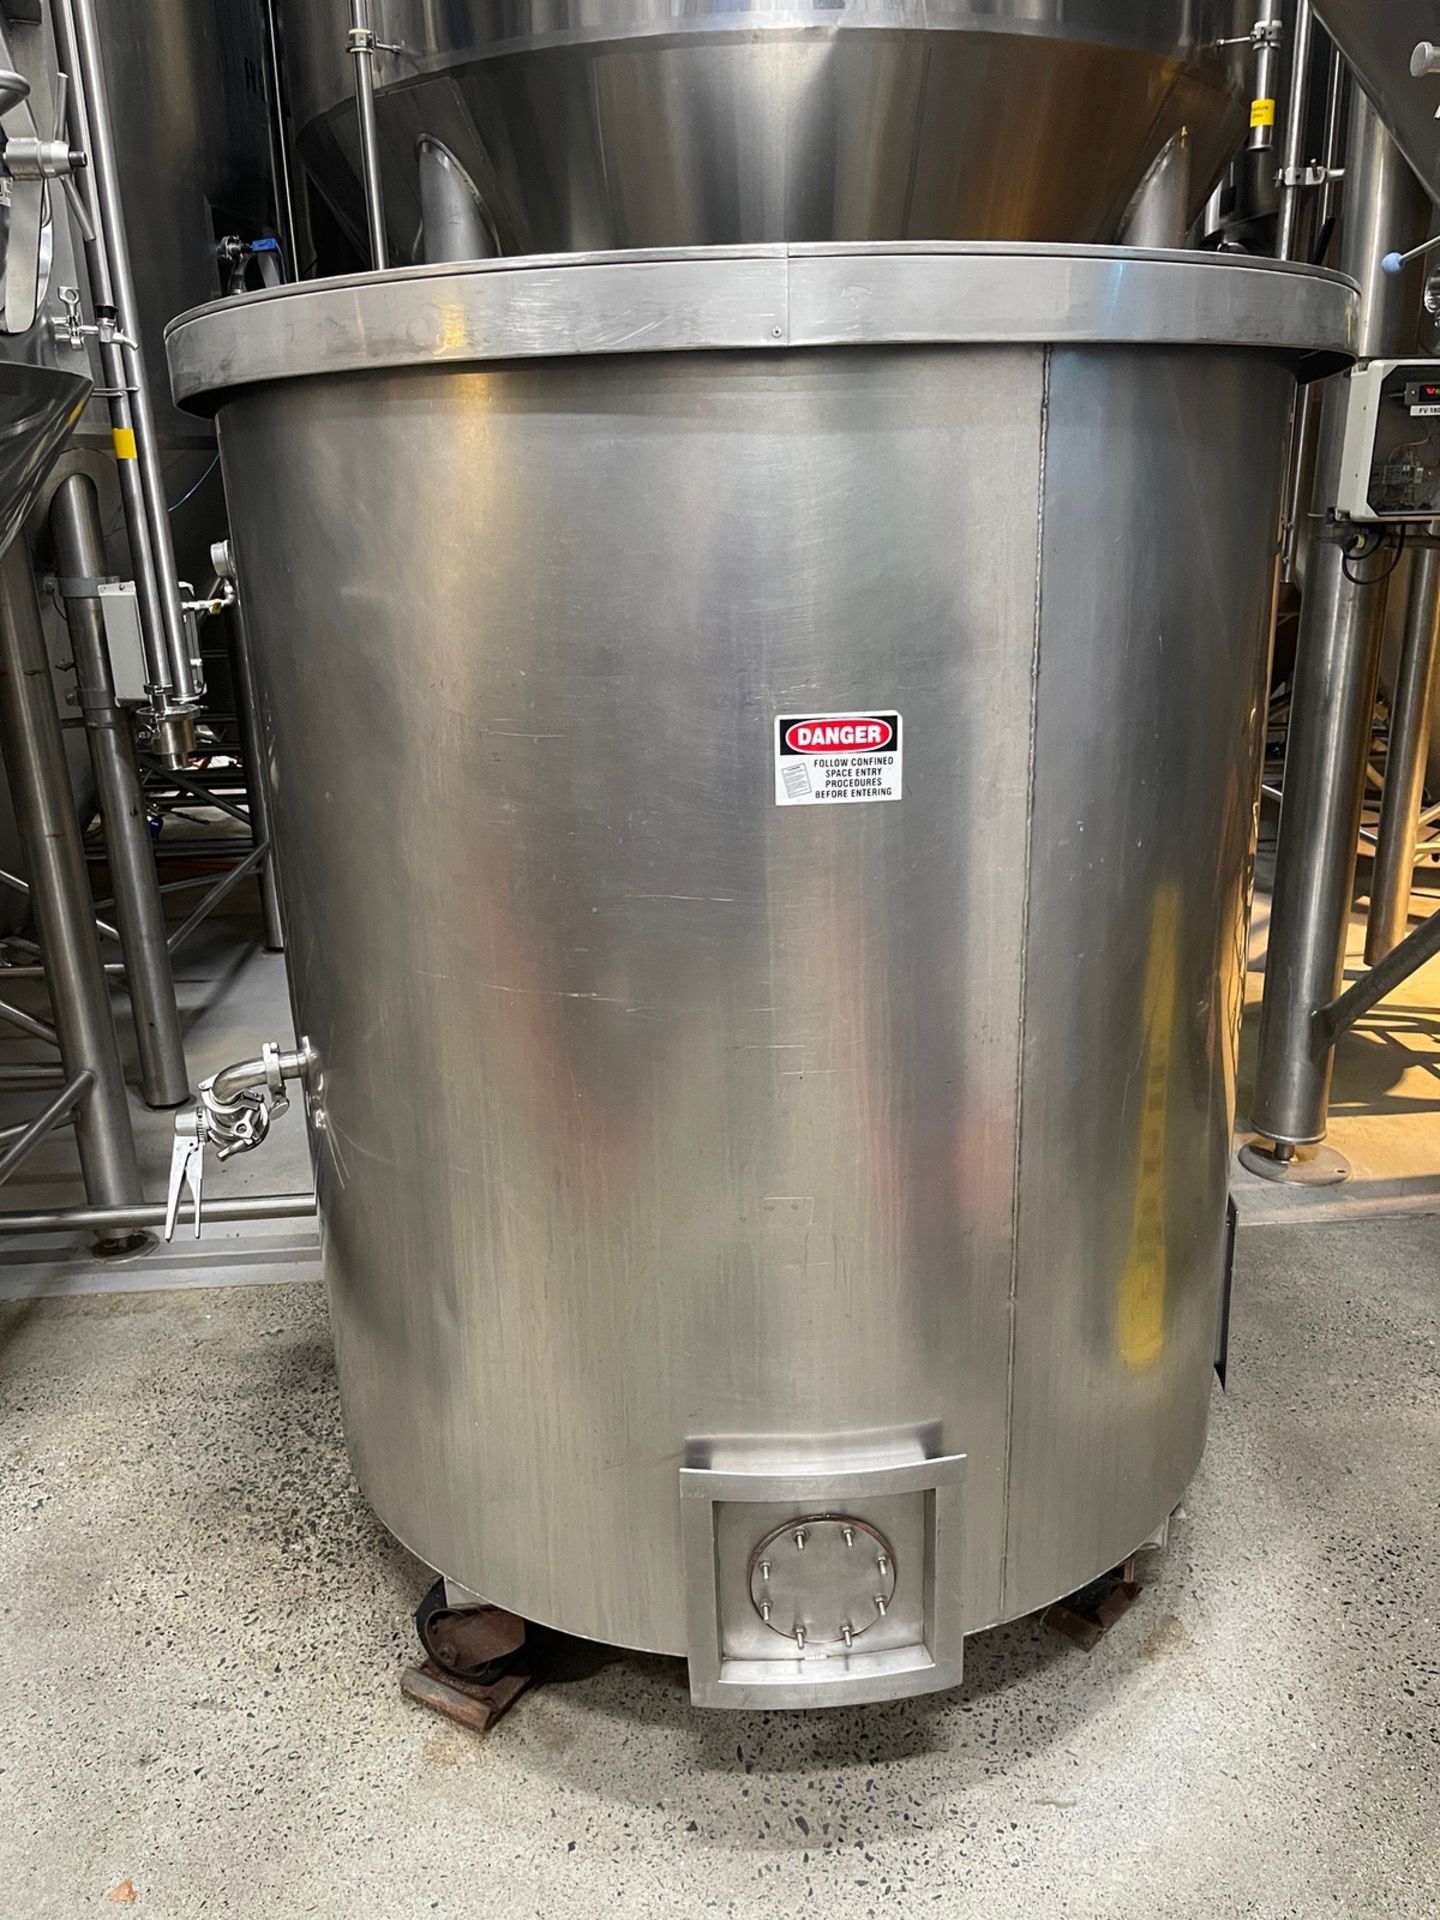 550 Gallon Stainless Steel Flat Bottom, Single Wall Utility Tank on Casters, Appro | Rig Fee $50 - Image 3 of 3